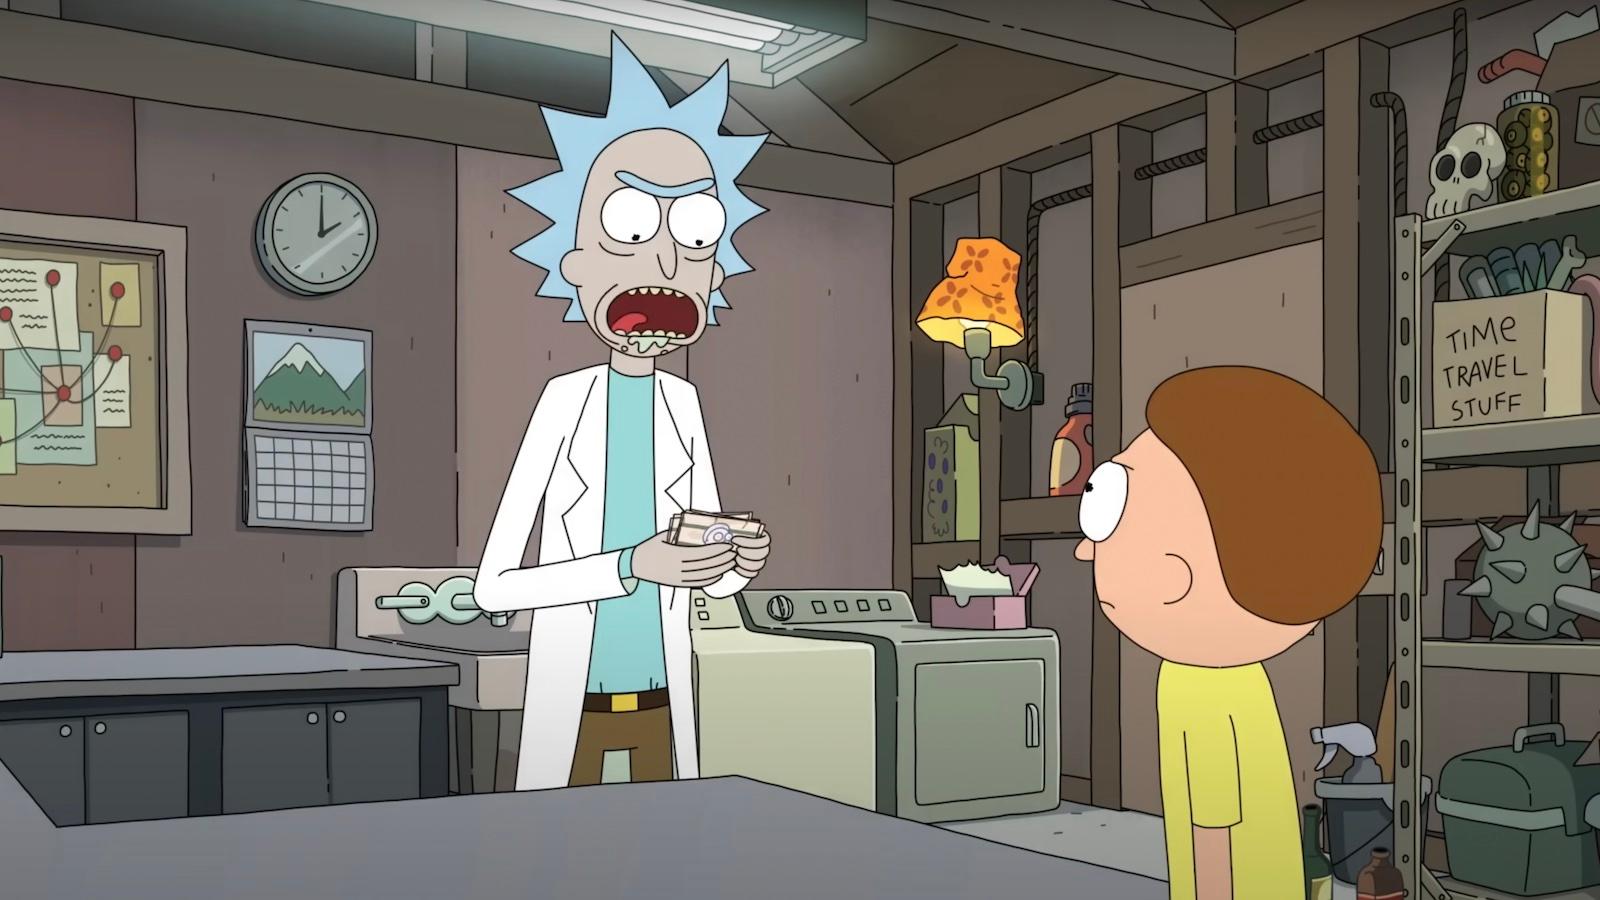 Rick and Morty Season 7 Episode 7 Streaming: How to Watch & Stream